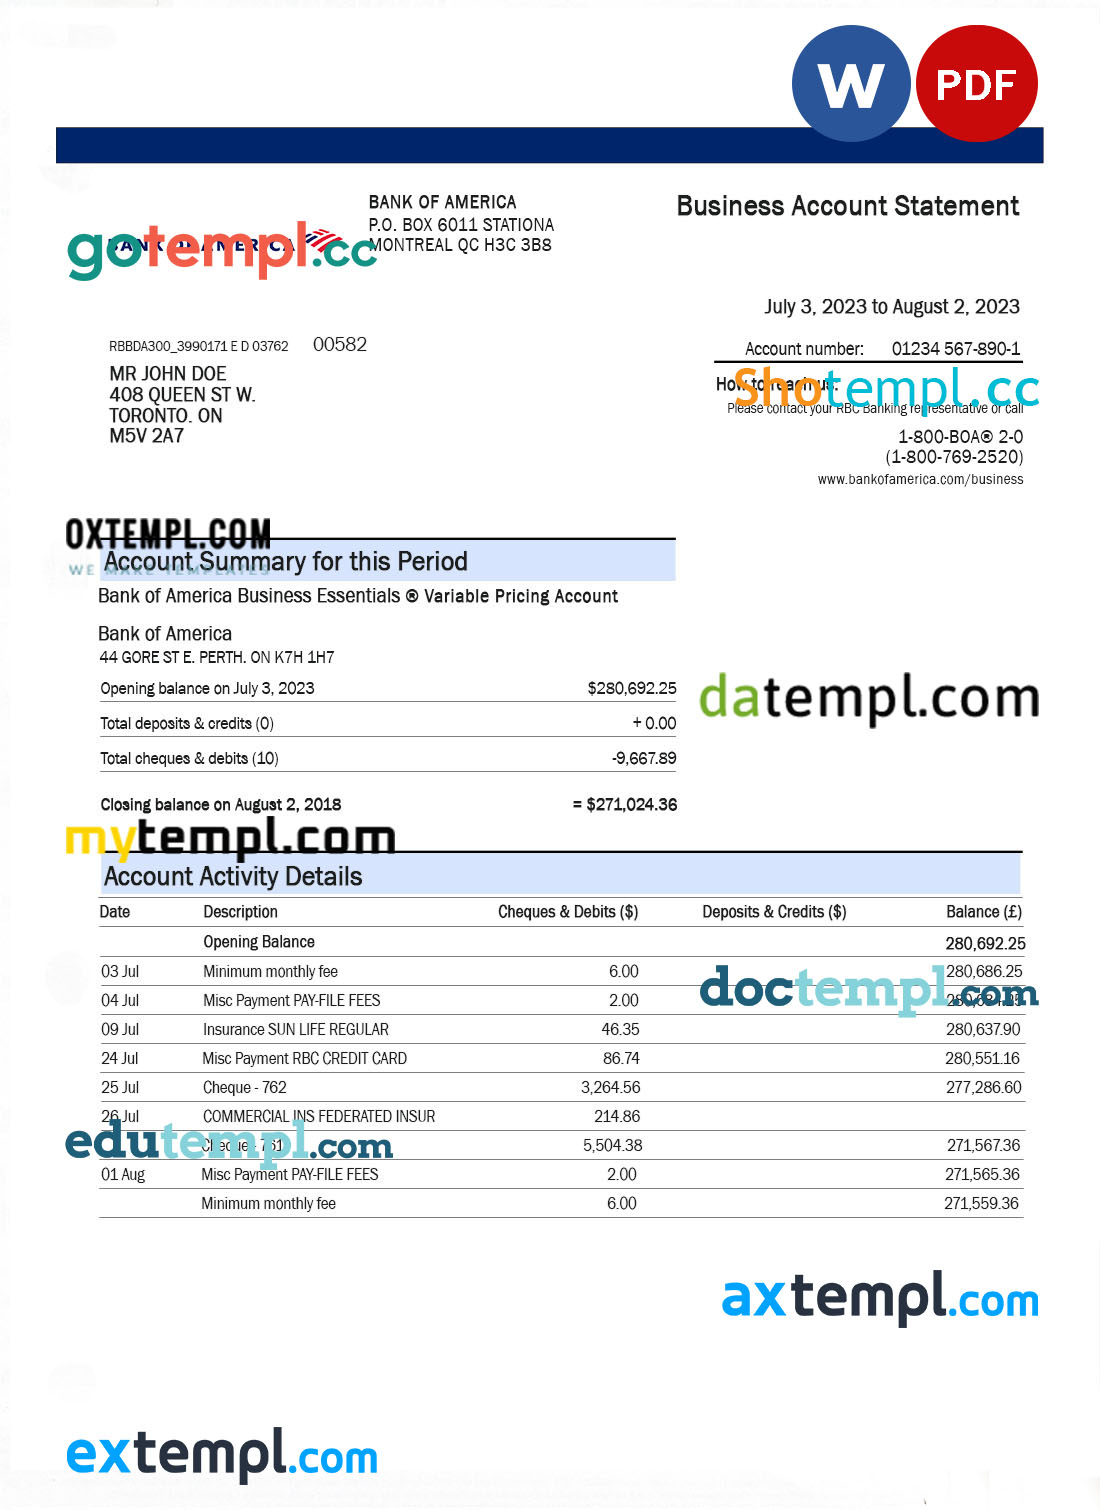 Bank of America organization bank statement Word and PDF template